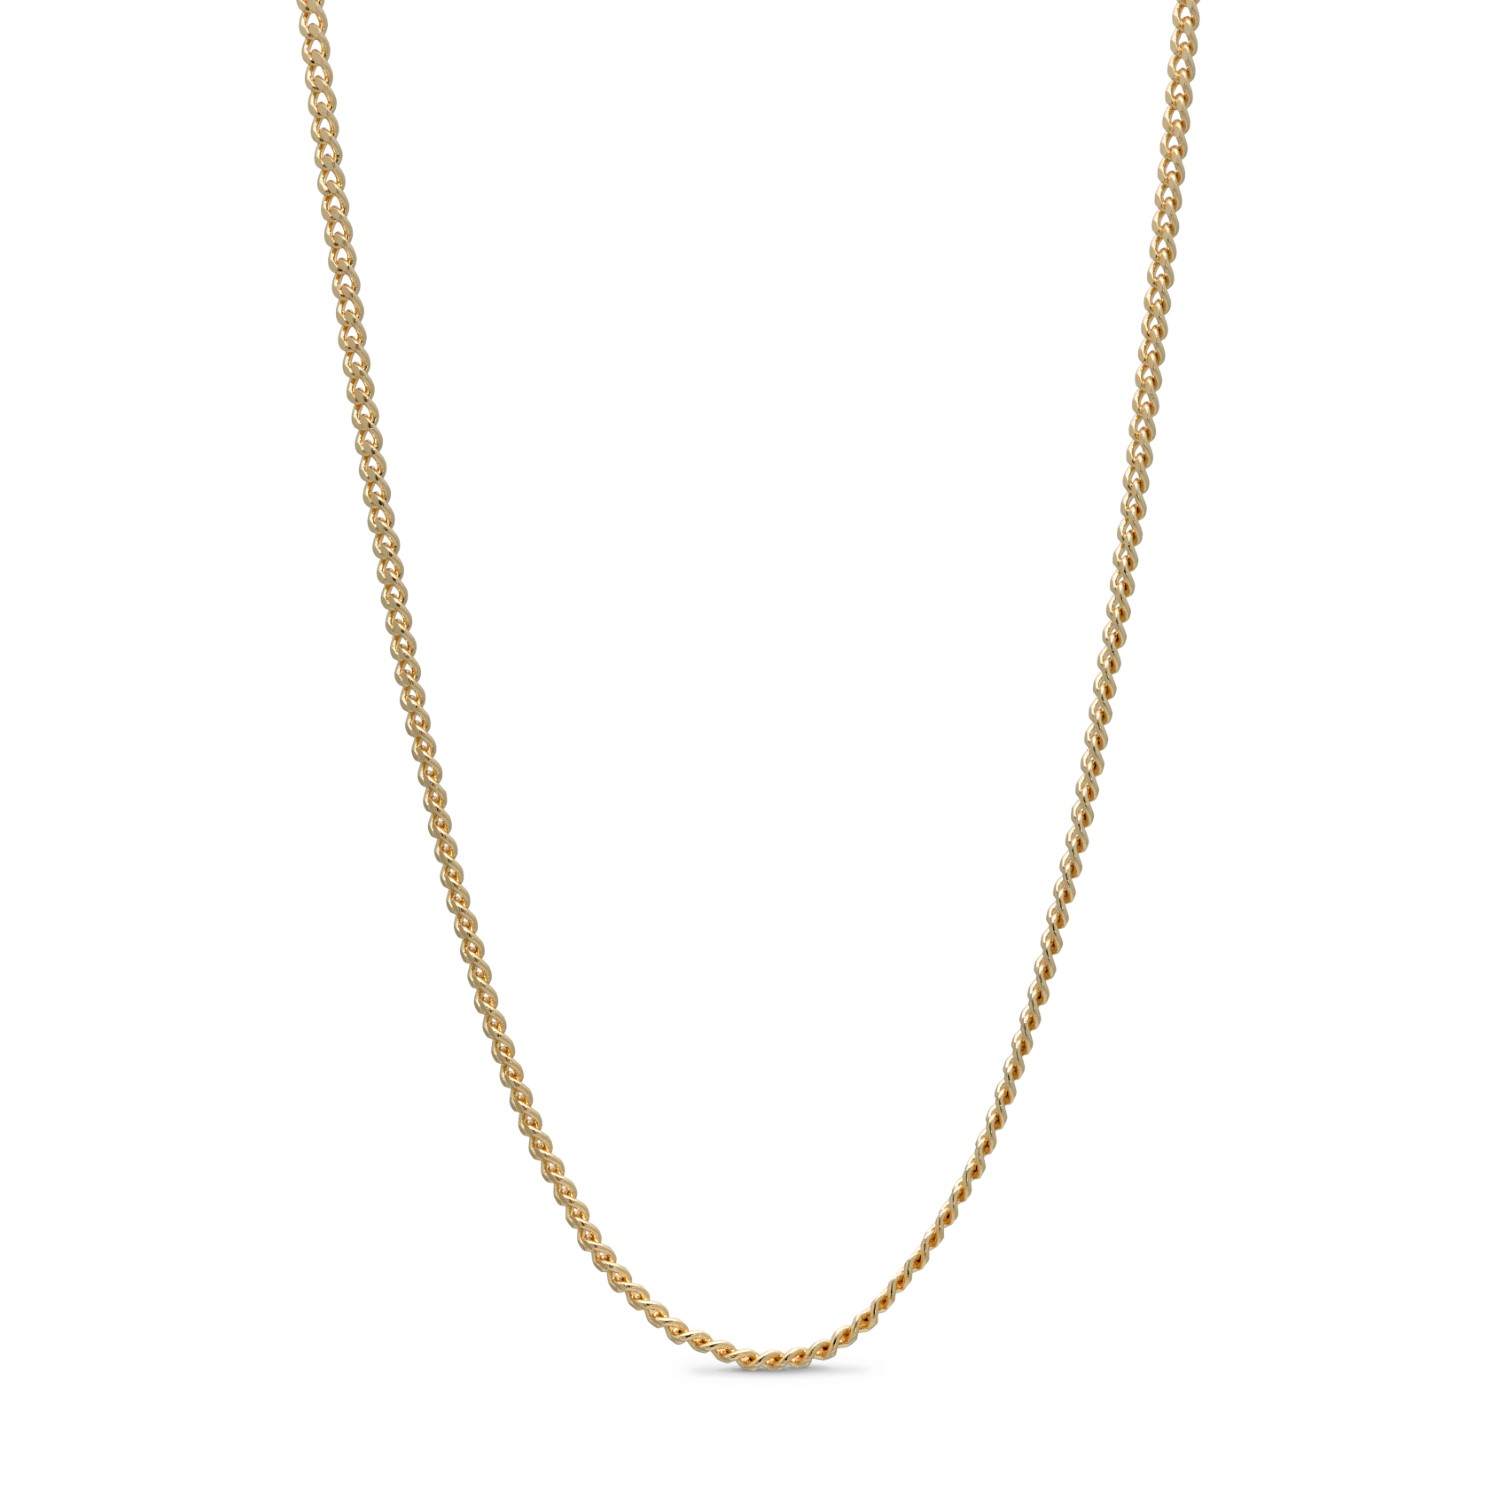 31760 chain necklace